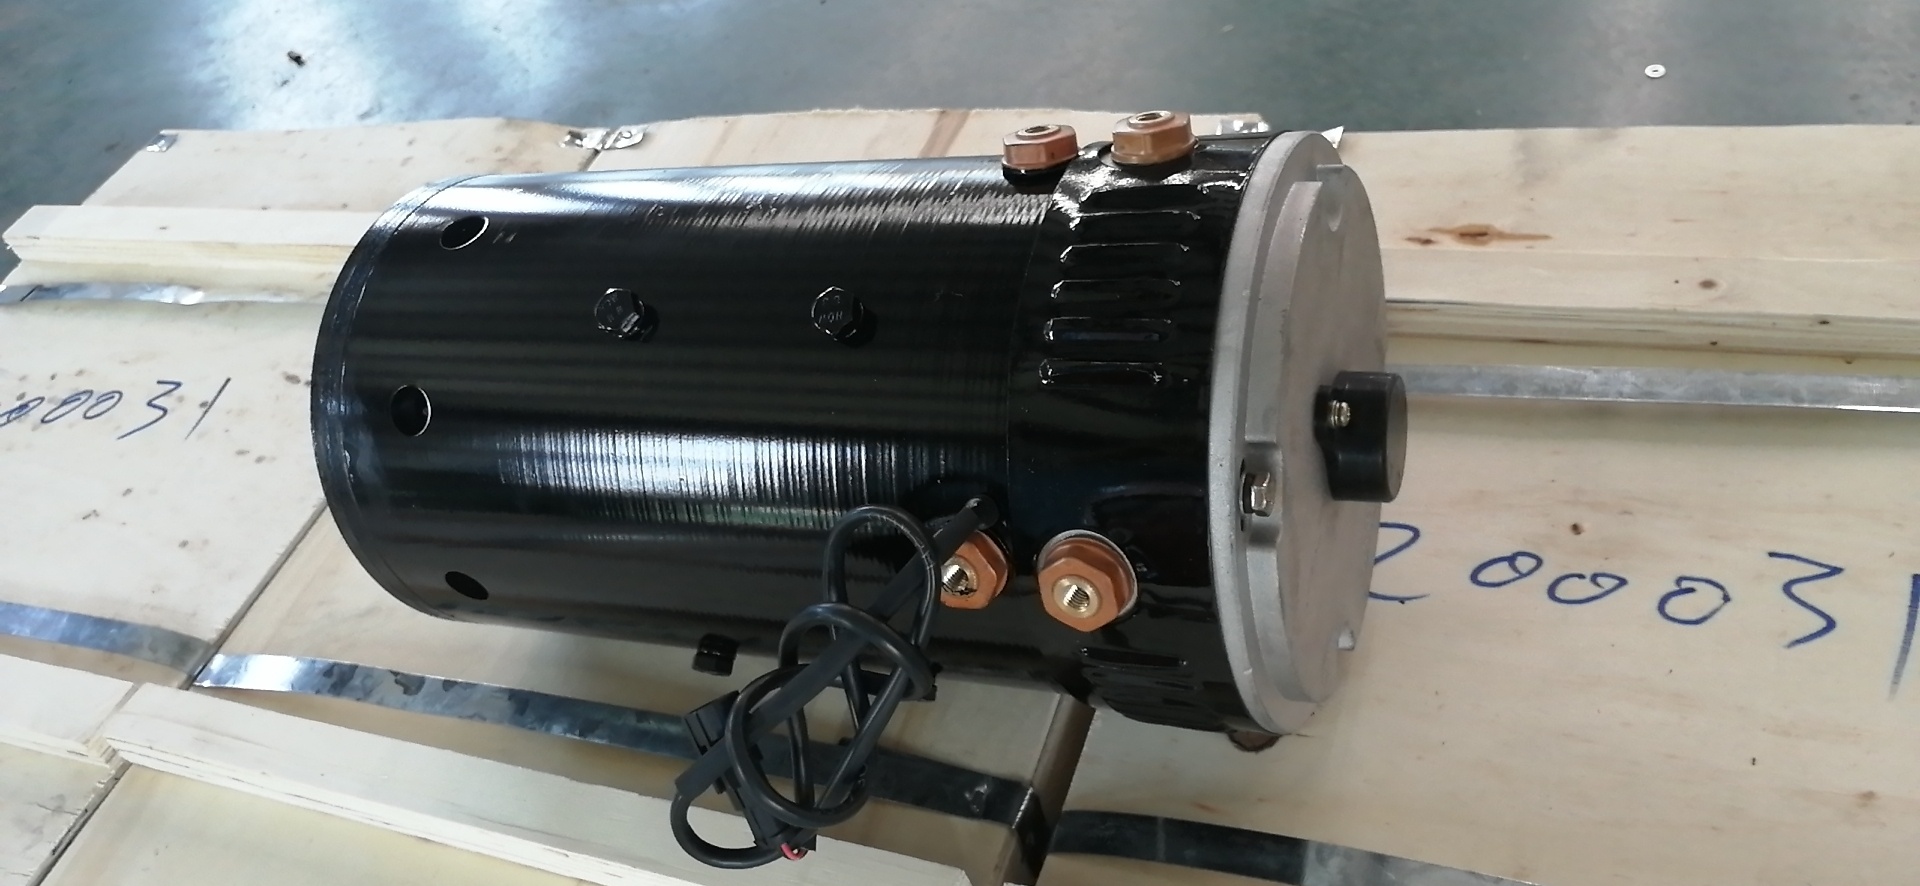 4KW48V2800rpm series exited DC motor